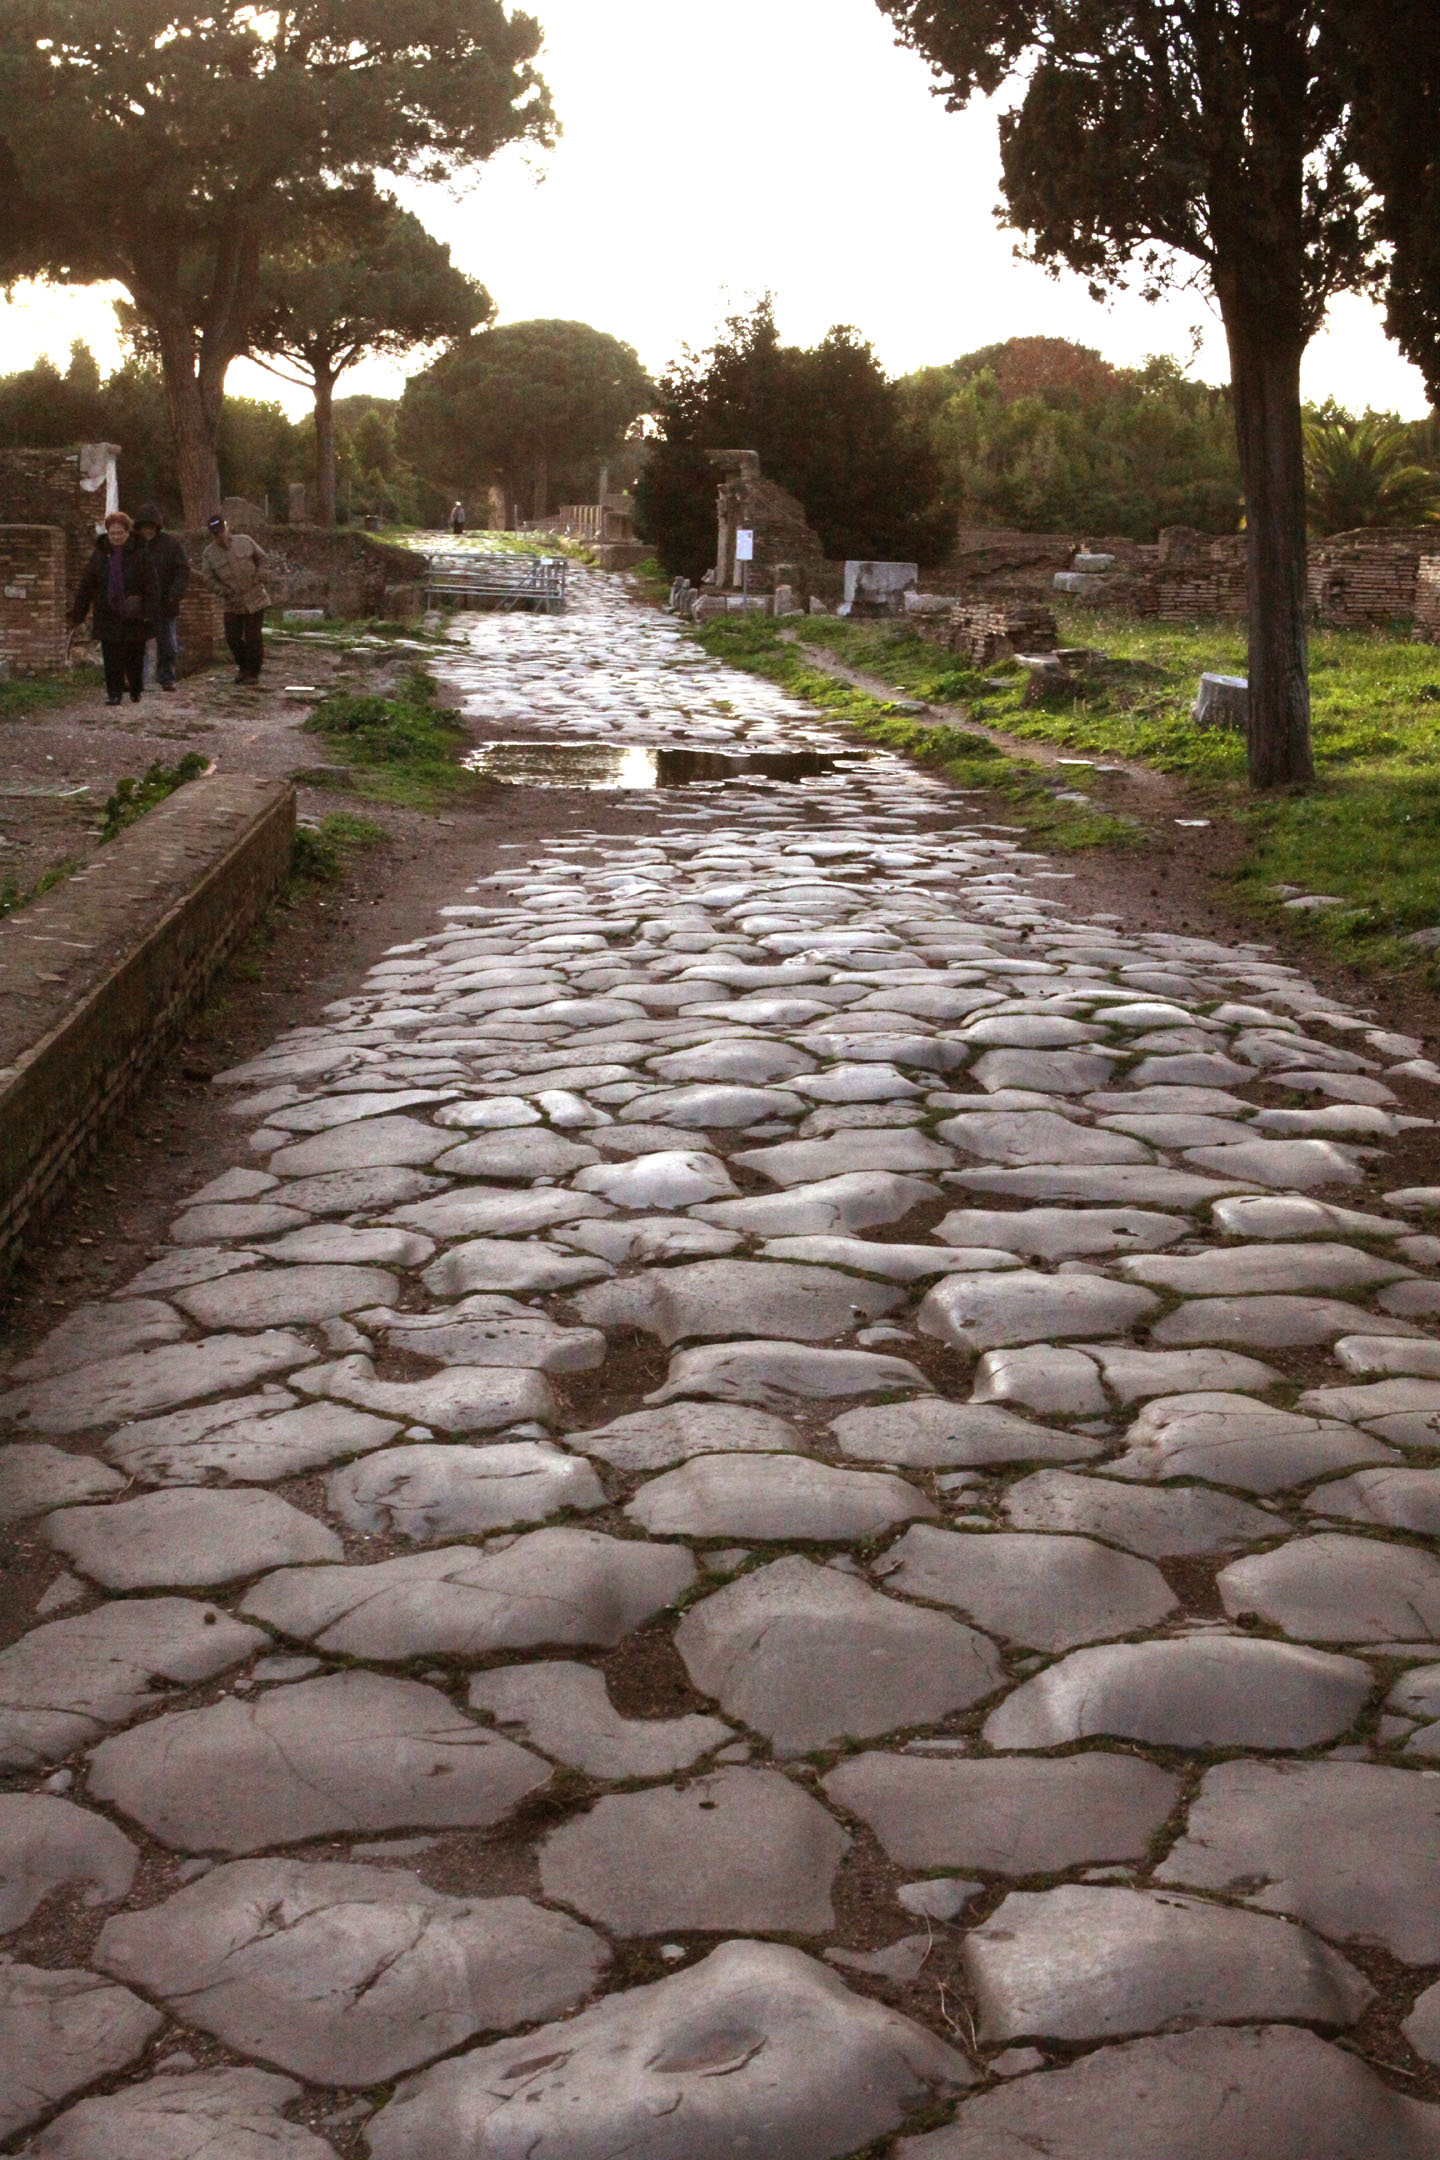 Sections of Via Appia.